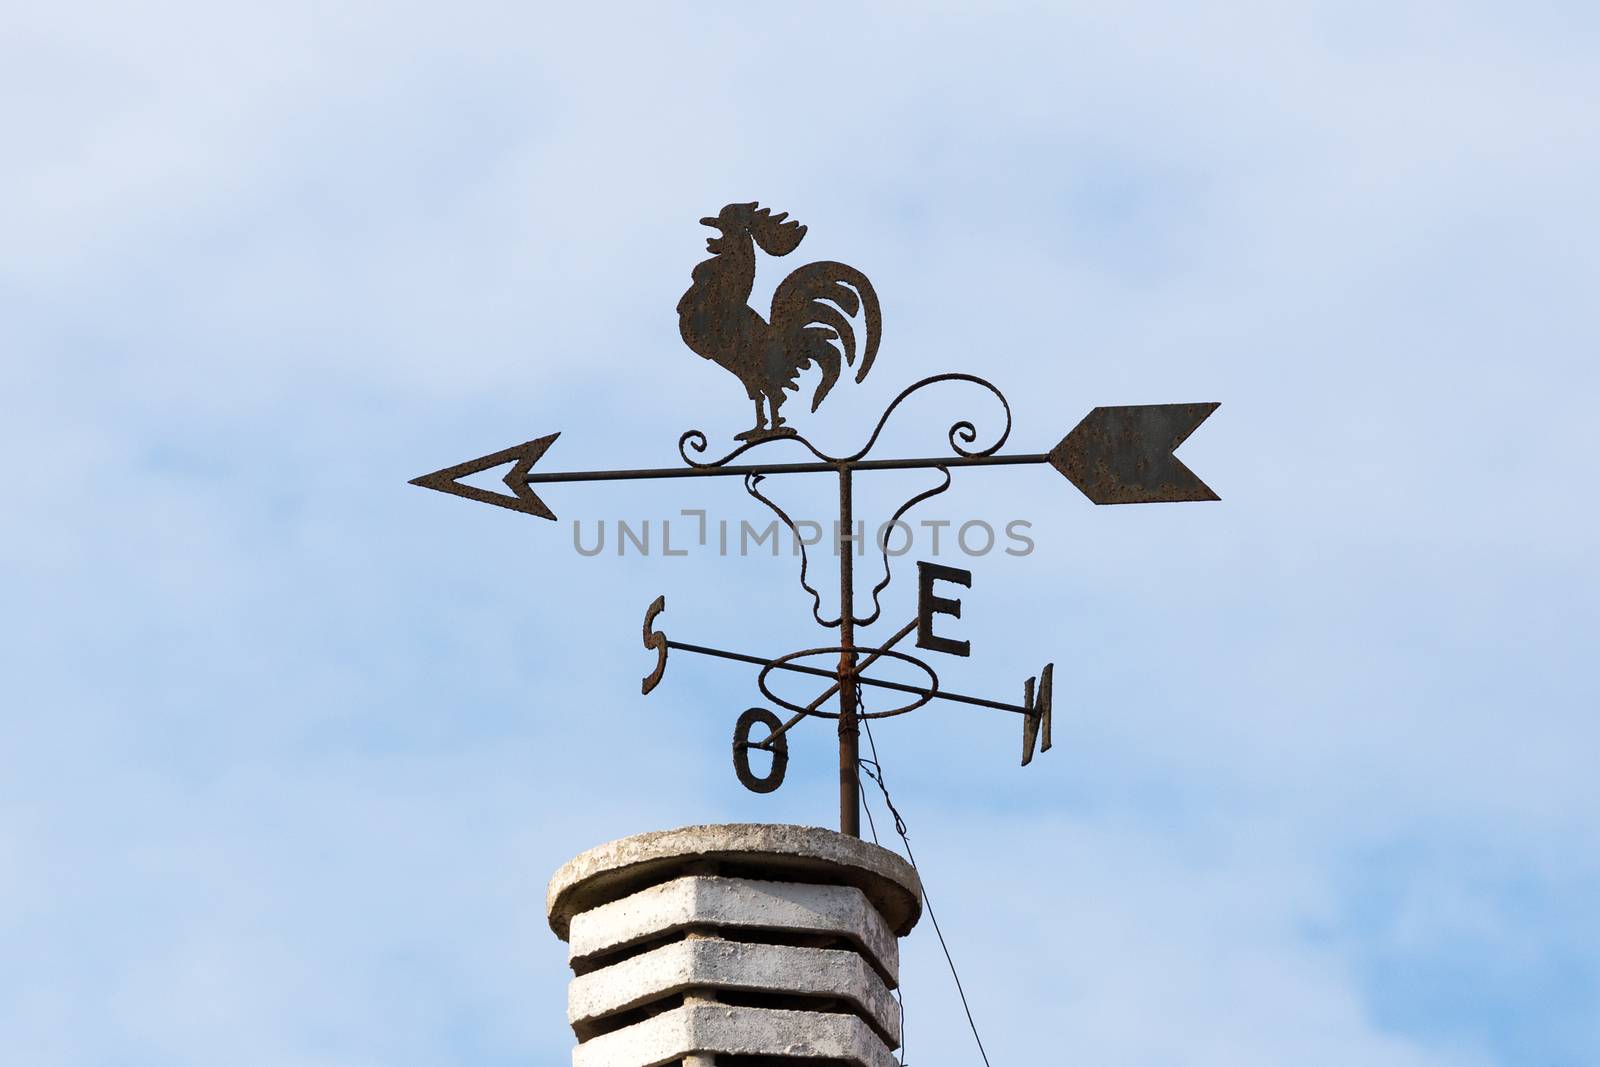 Weathercock on the chimney by Digoarpi